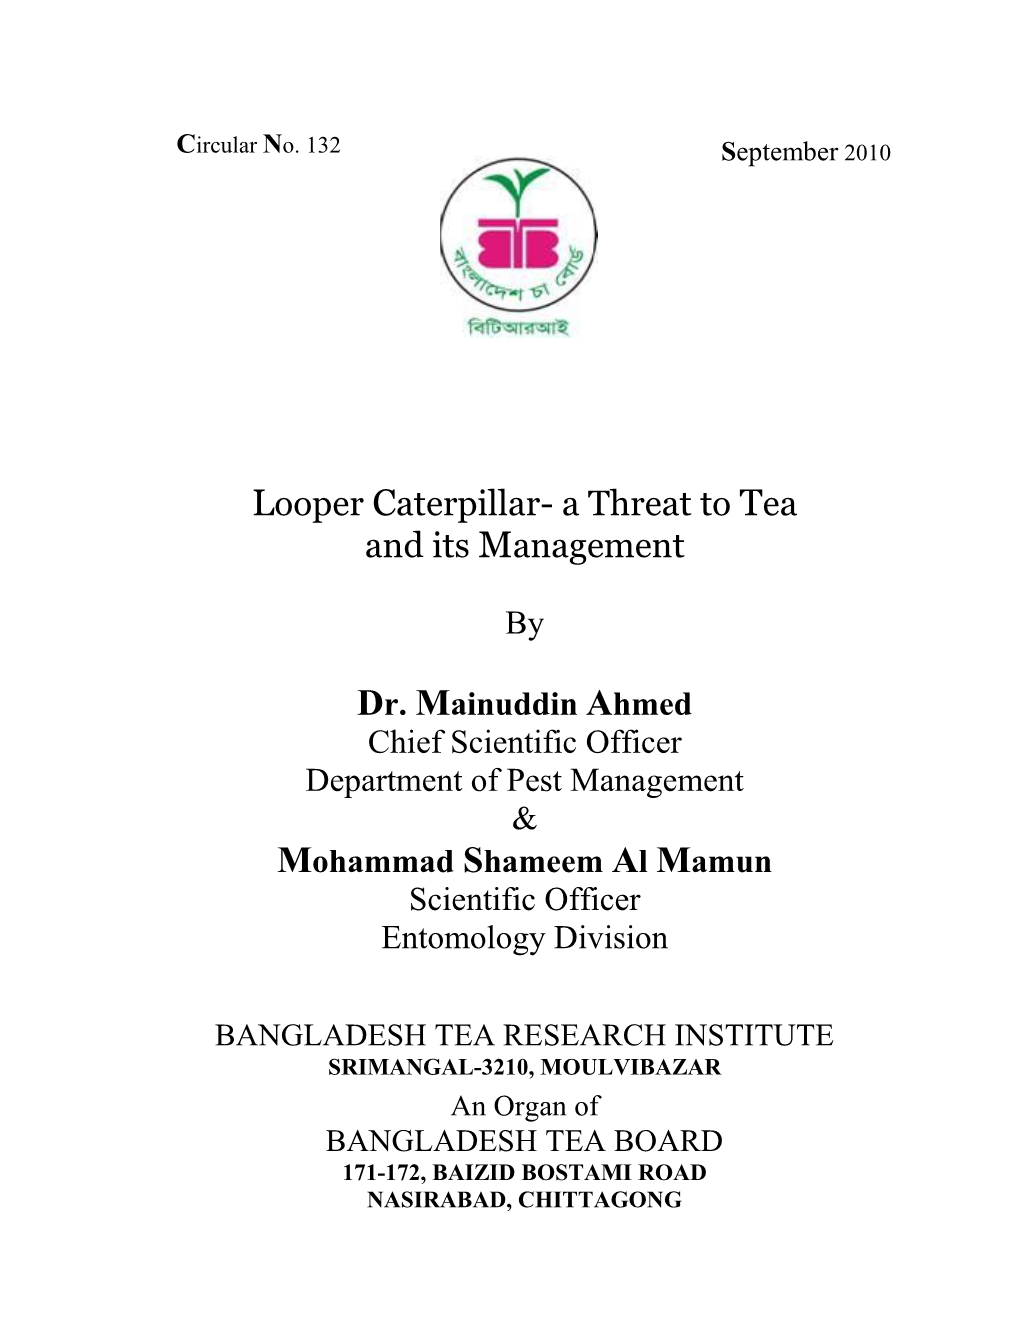 Looper Caterpillar- a Threat to Tea and Its Management